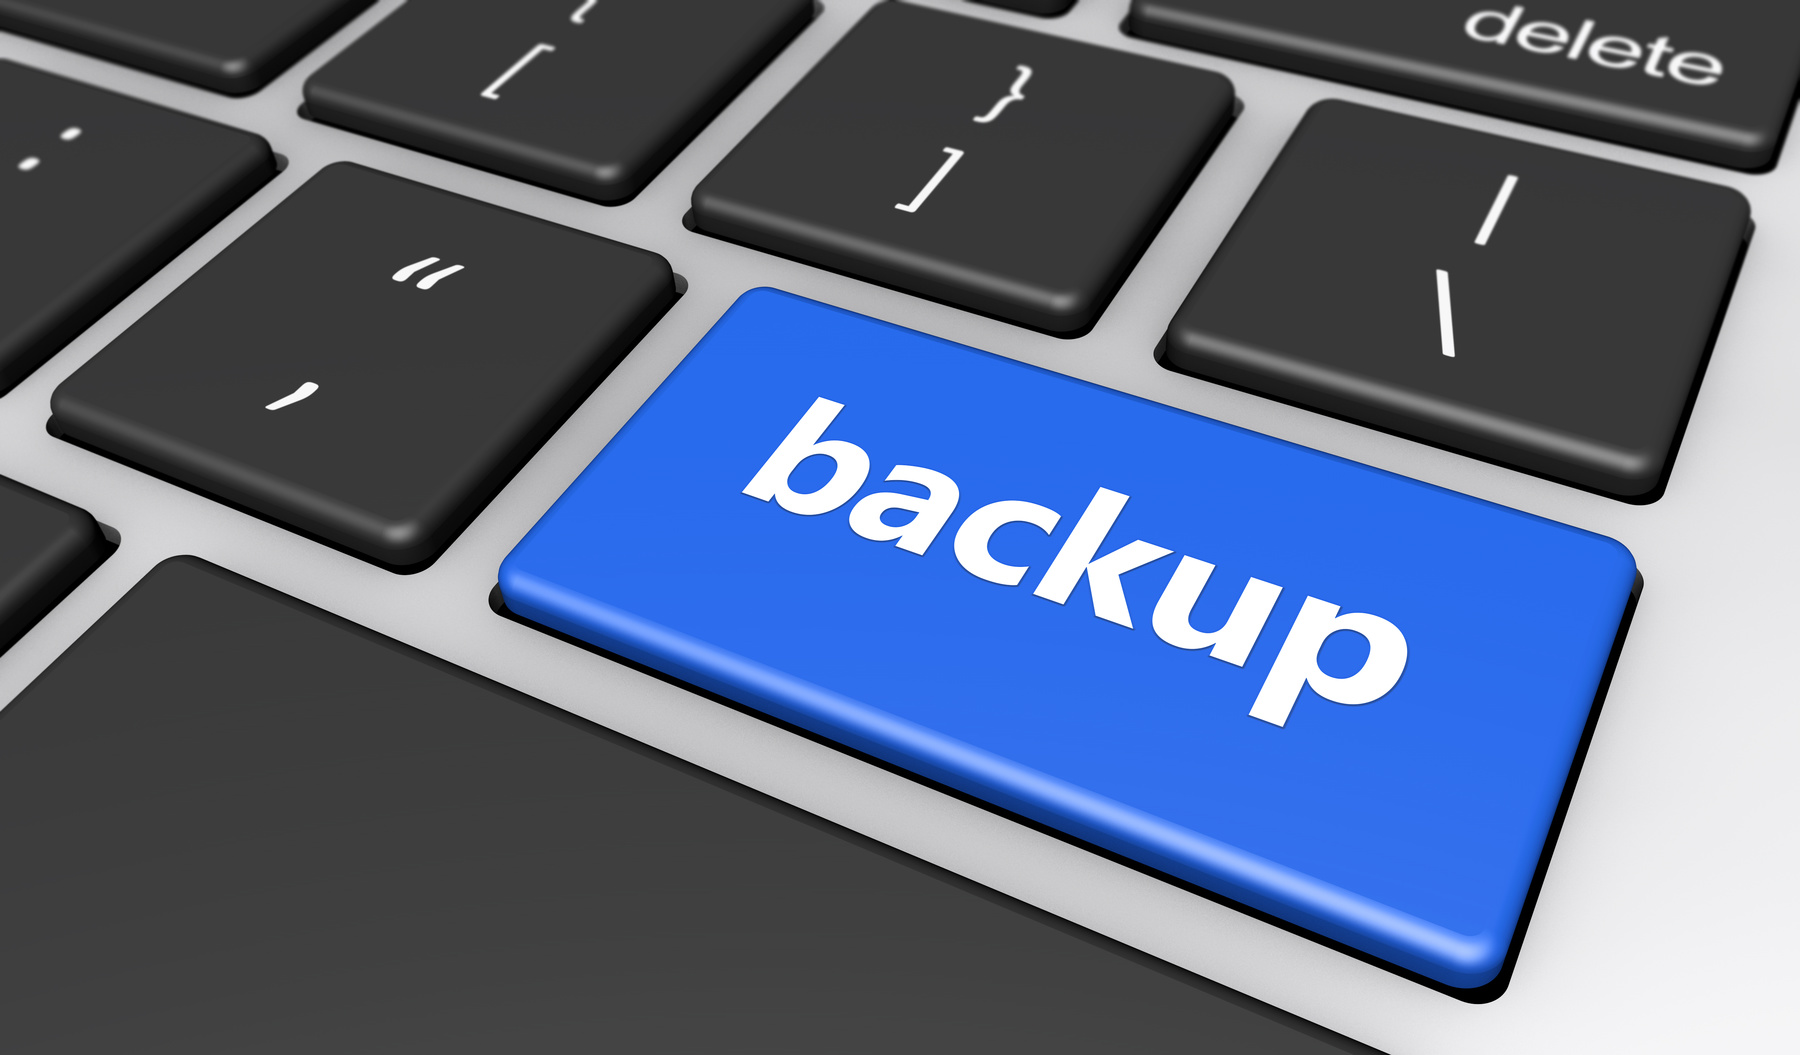 computer definition of data backup